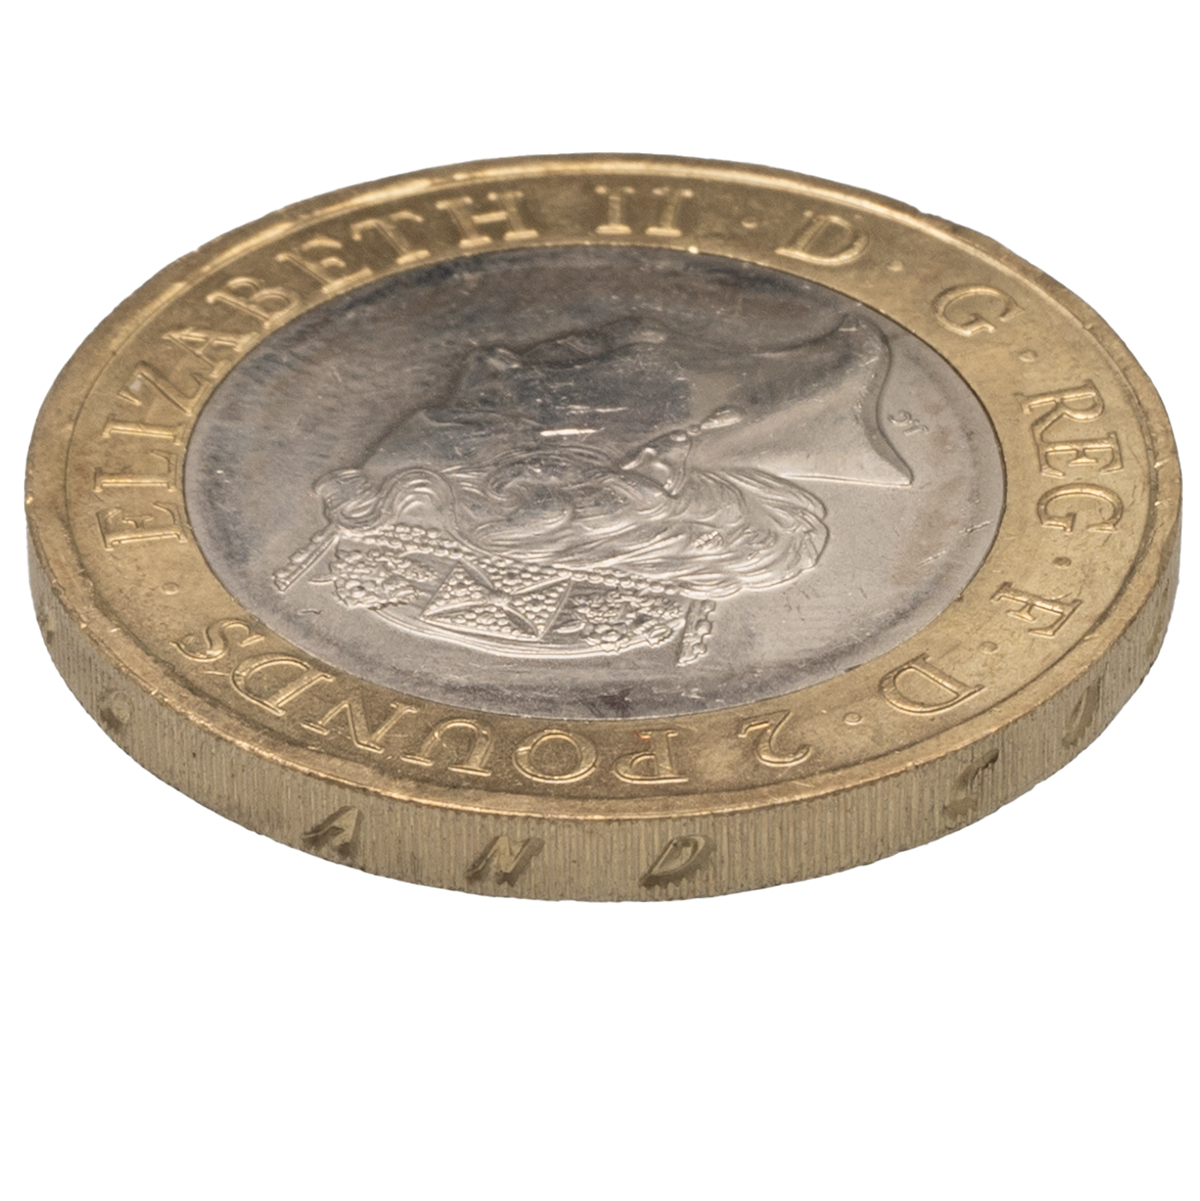 2016 William Shakespeare's Tragedies skull and rose error edge circulating £2 coin from The Royal... - Image 5 of 6